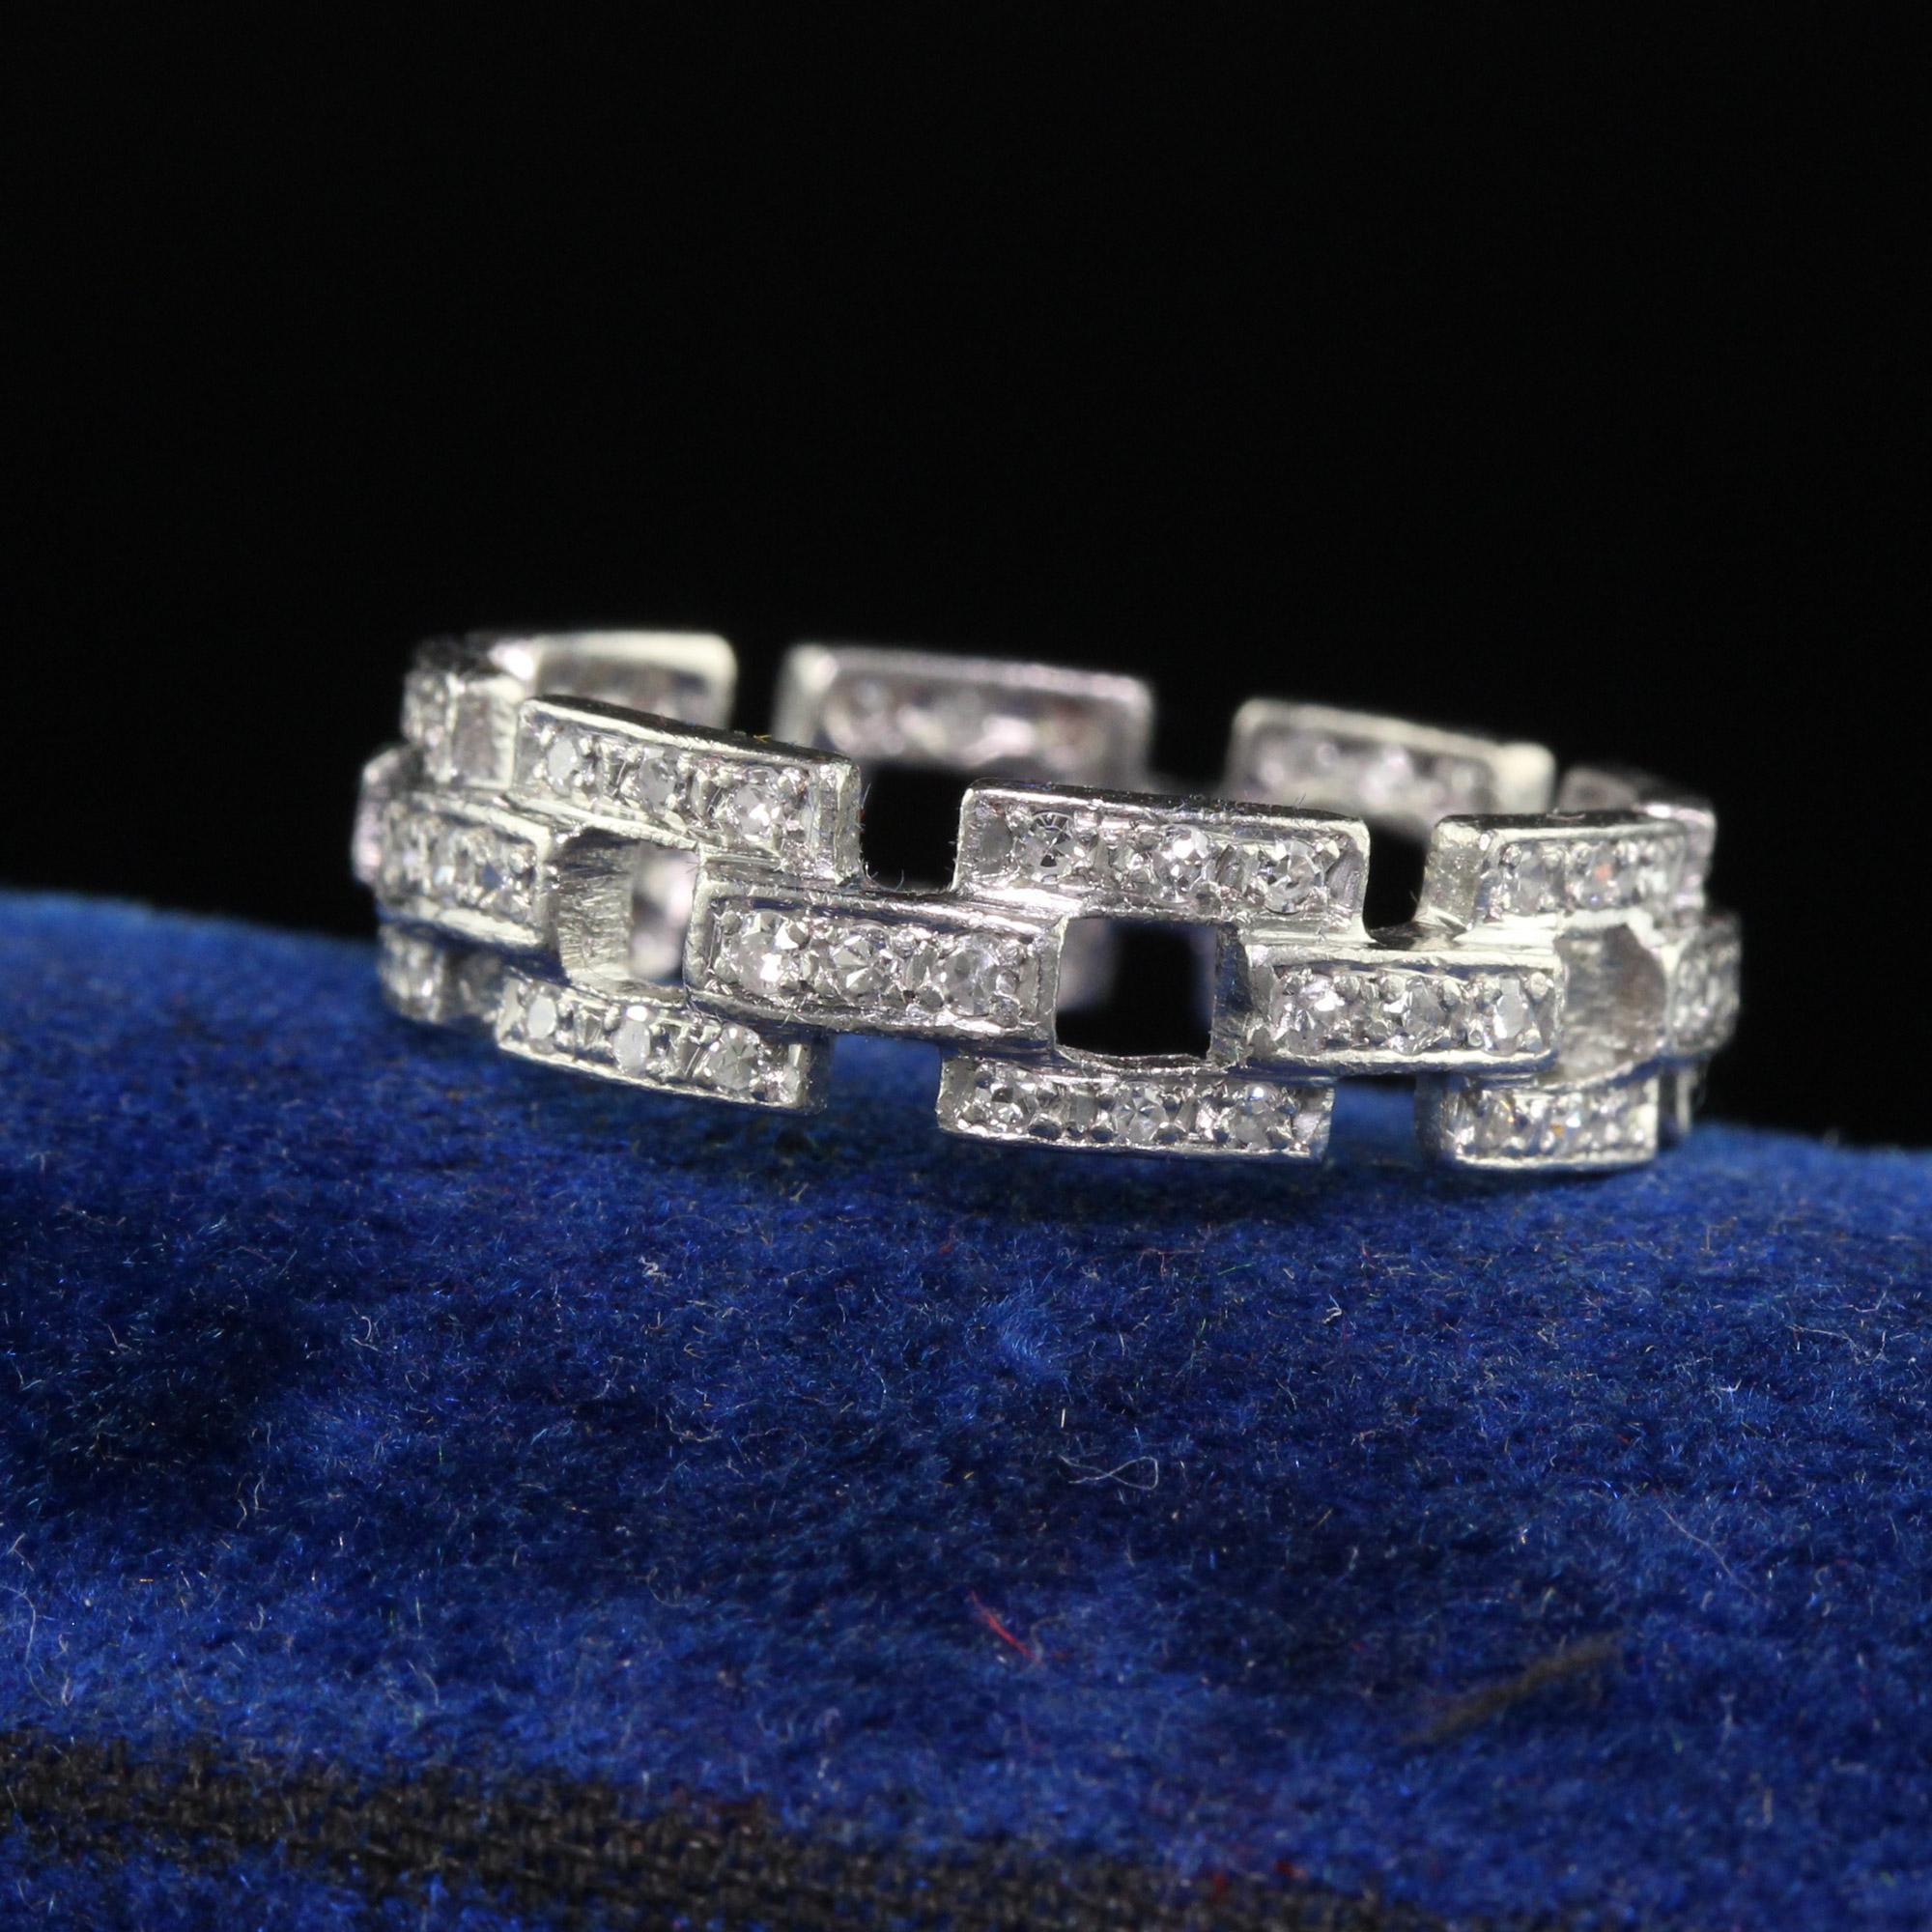 Beautiful Antique Art Deco Platinum Single Cut Diamond Buckle Eternity Band - Size 6 3/4. This beautiful wedding band is crafted in platinum. The ring has single cut diamonds going around the entire ring in a buckle pattern. The ring is in good